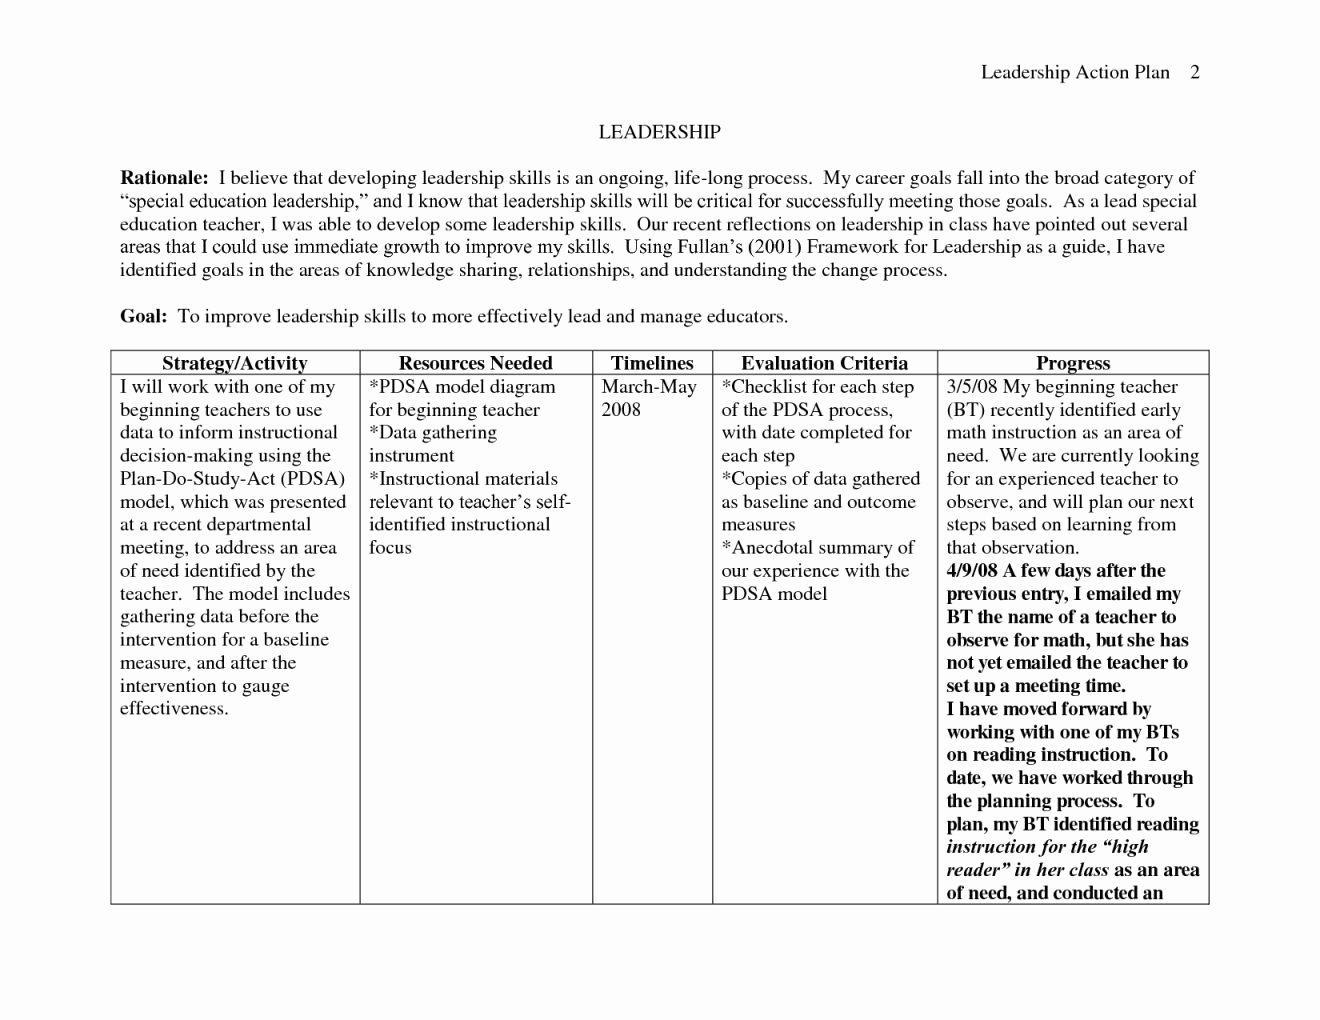 New Personal Leadership Action Plan Sample Sy67